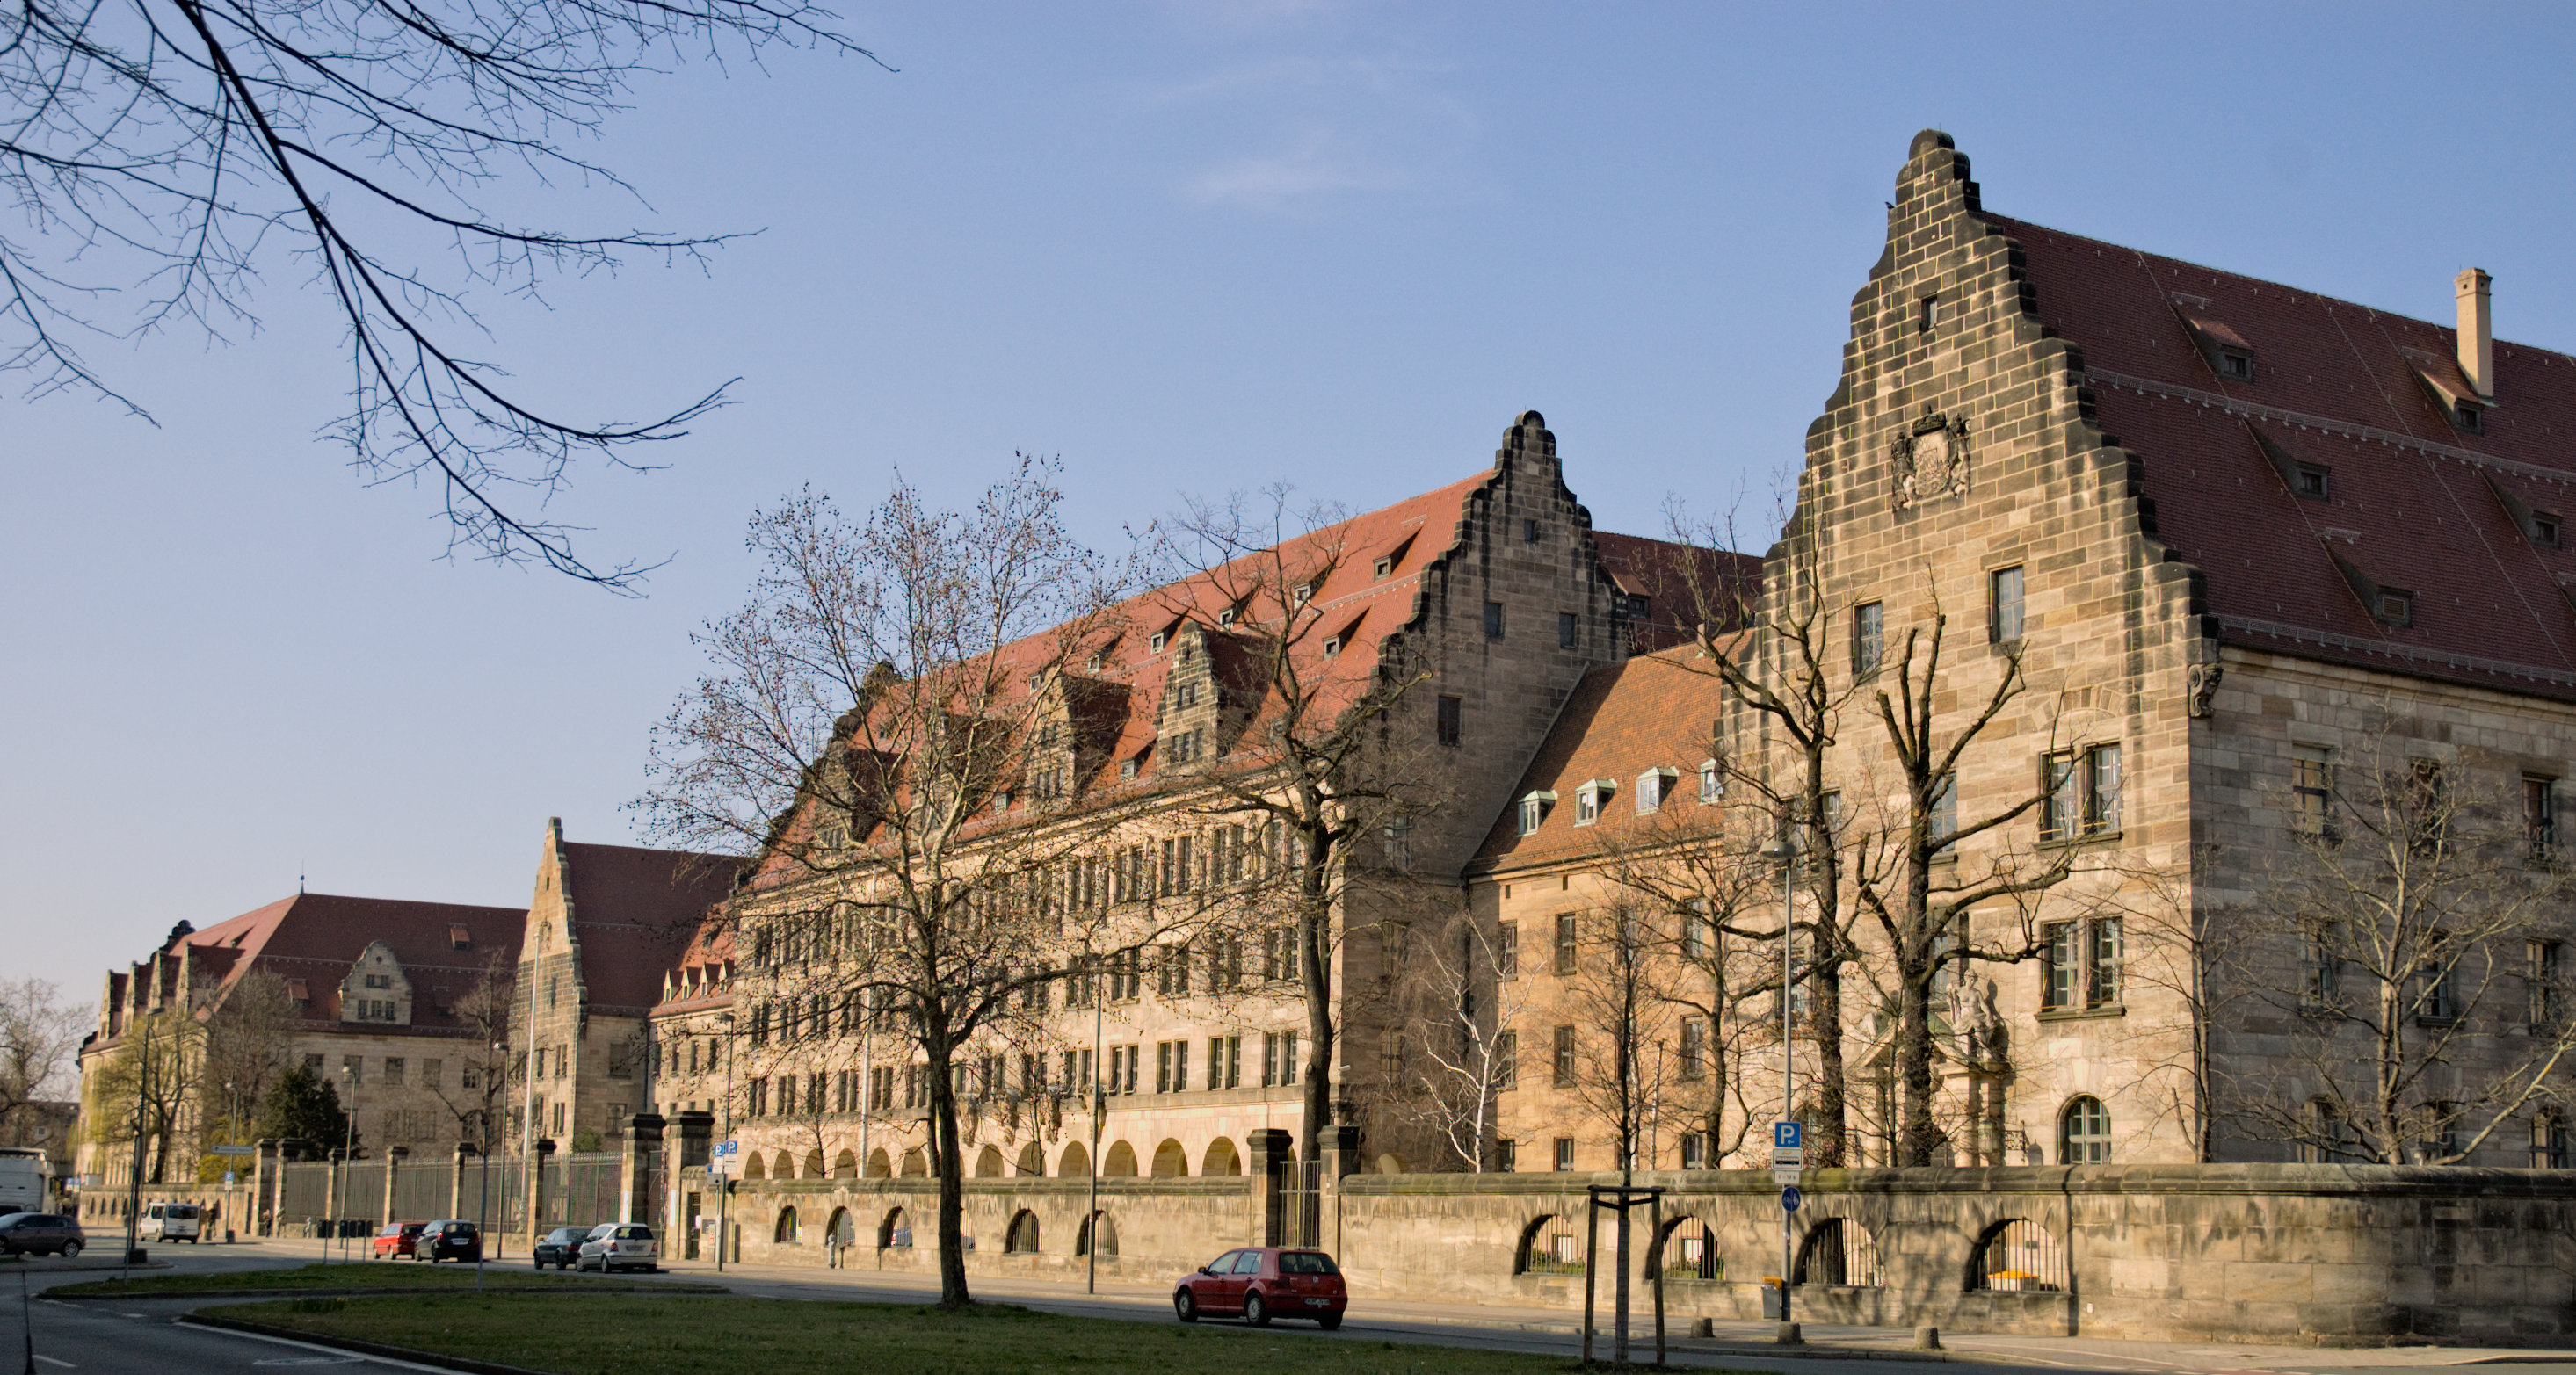 The Justizpalast (Palace of Justice) in Nuremberg